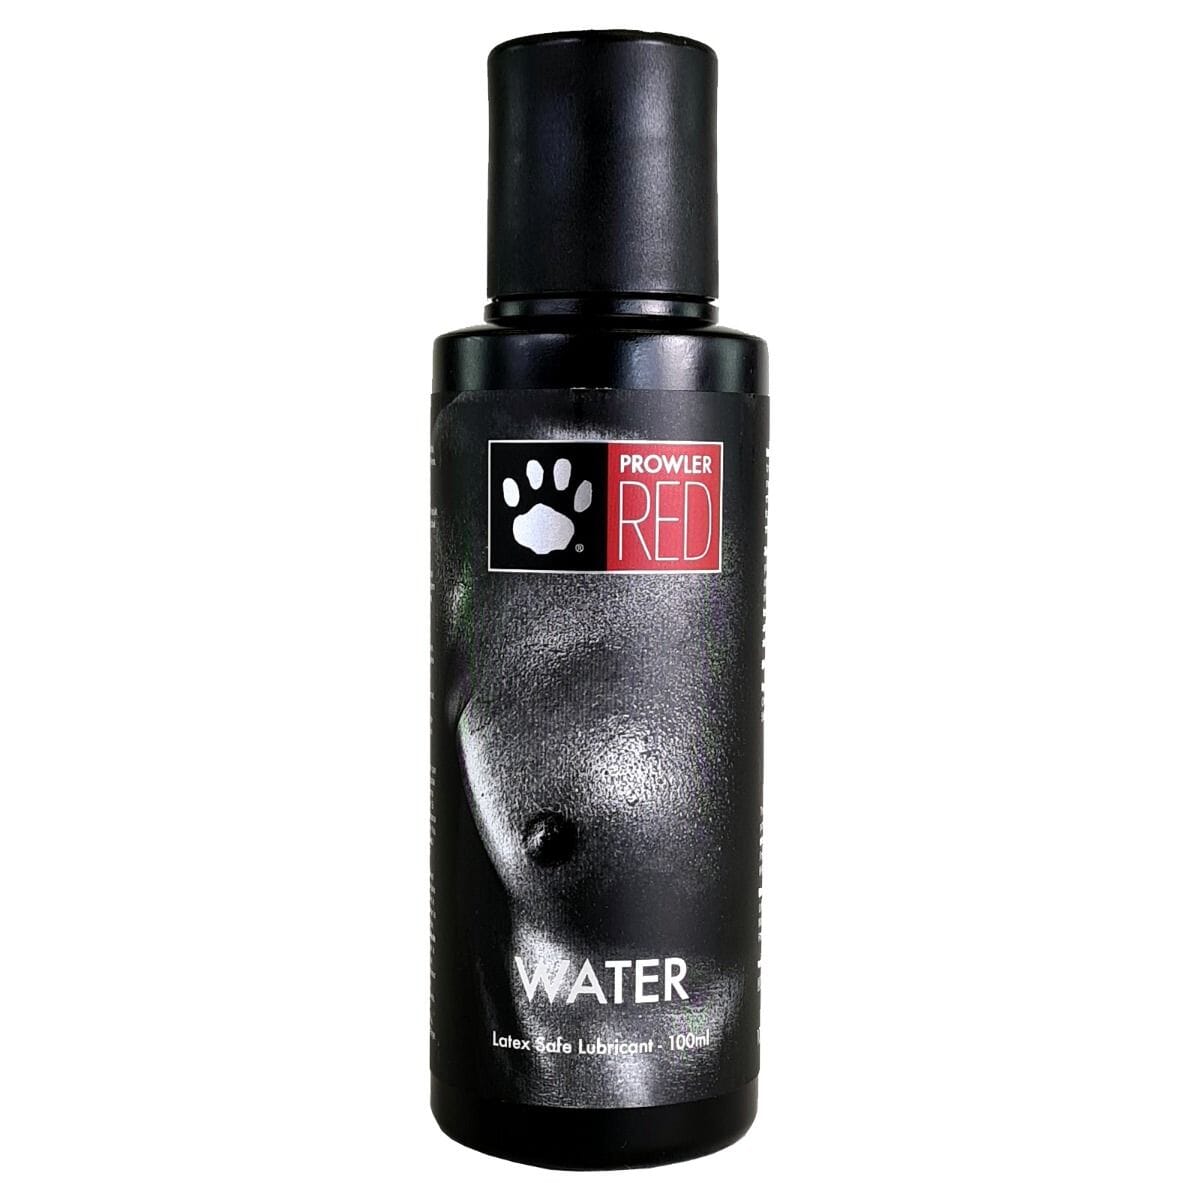 Prowler RED Waterbased Lubricant - Multiple Sizes